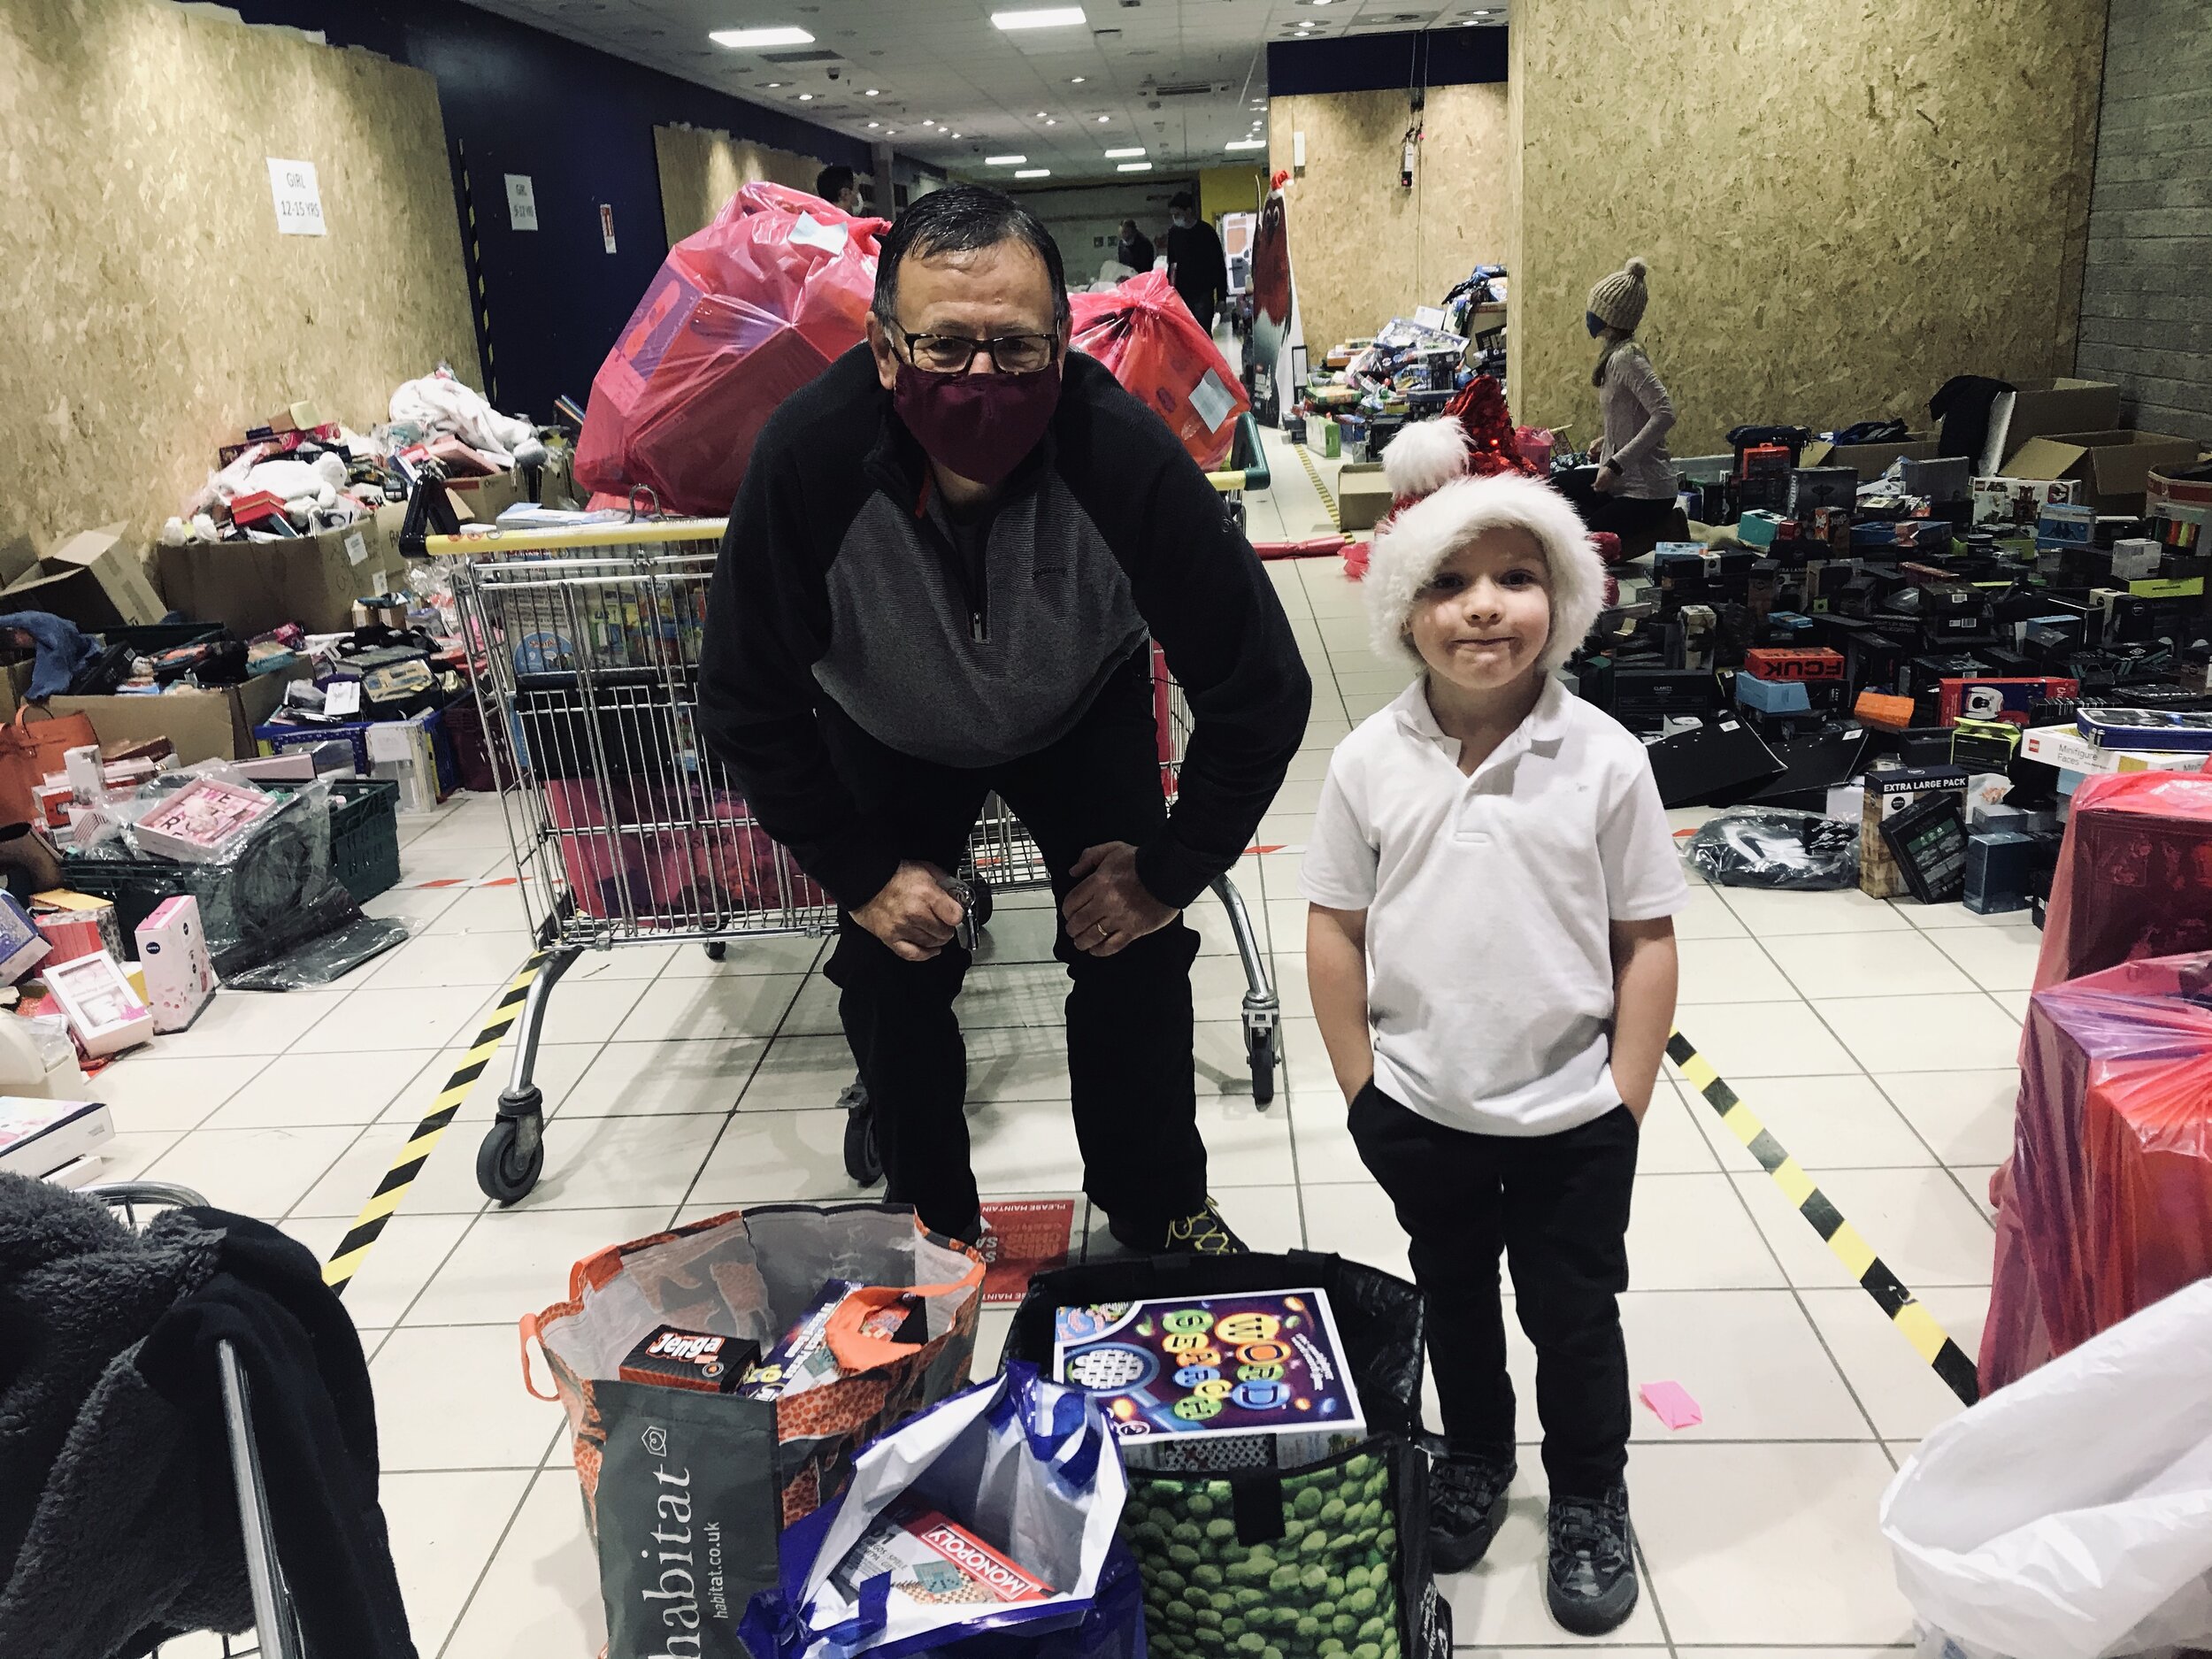  Suzy’s family helped her deliver £500 worth of toys to Cash for Kids Forth 1 - the scheme was incredibly popular, and we are thrilled to have been a part of it! 